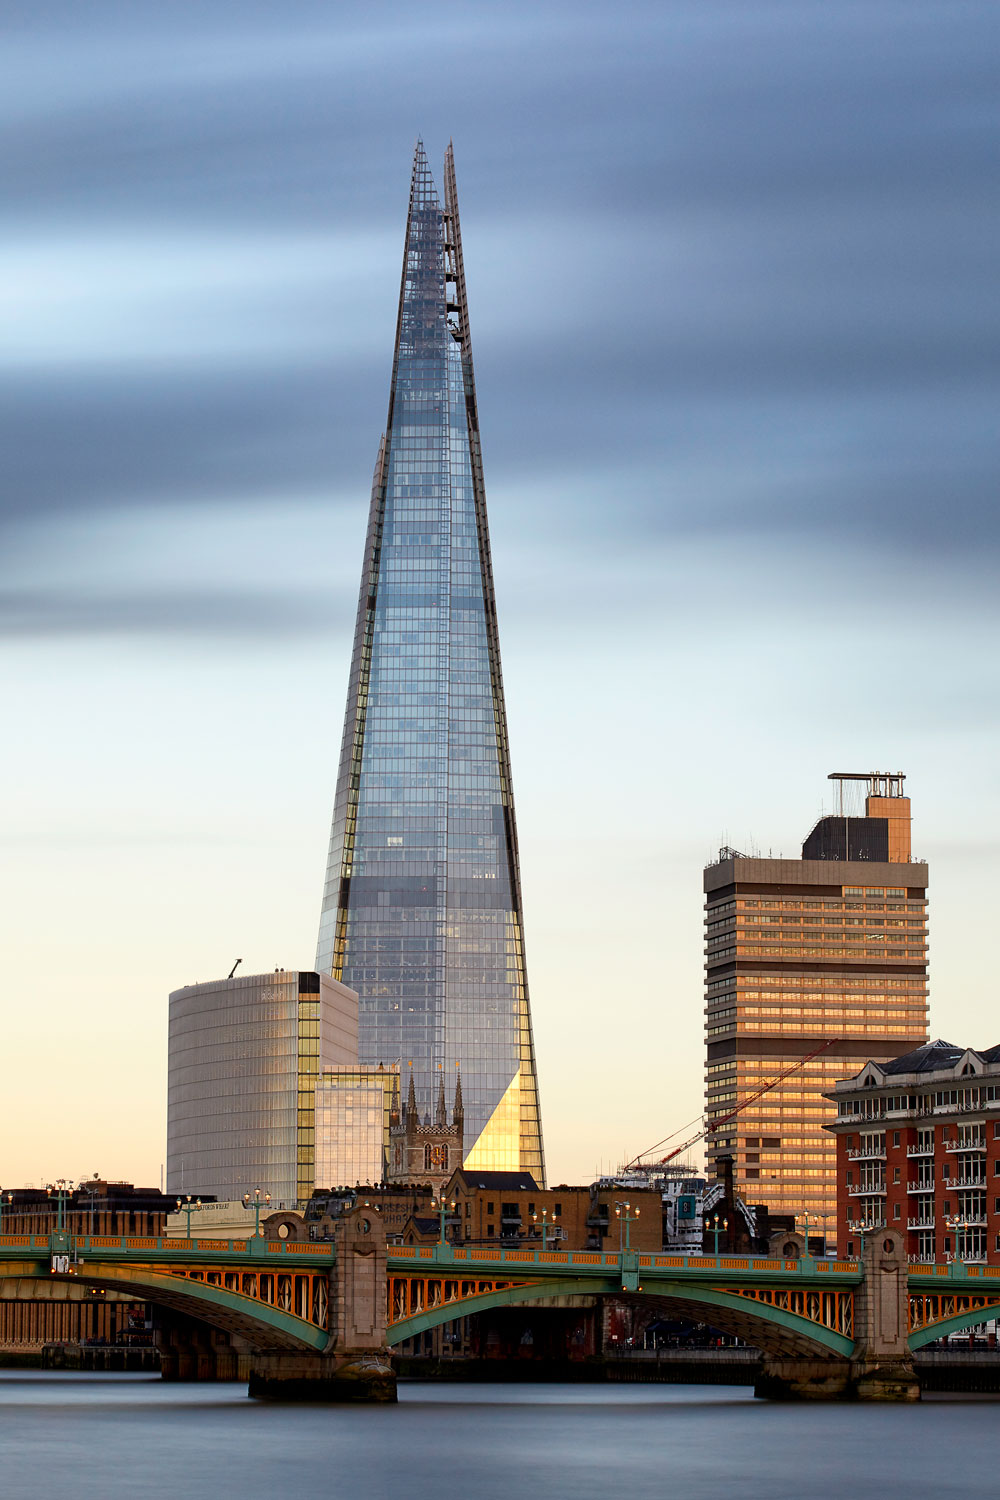 The Shard photographed in March 2017 by Marc Cluet